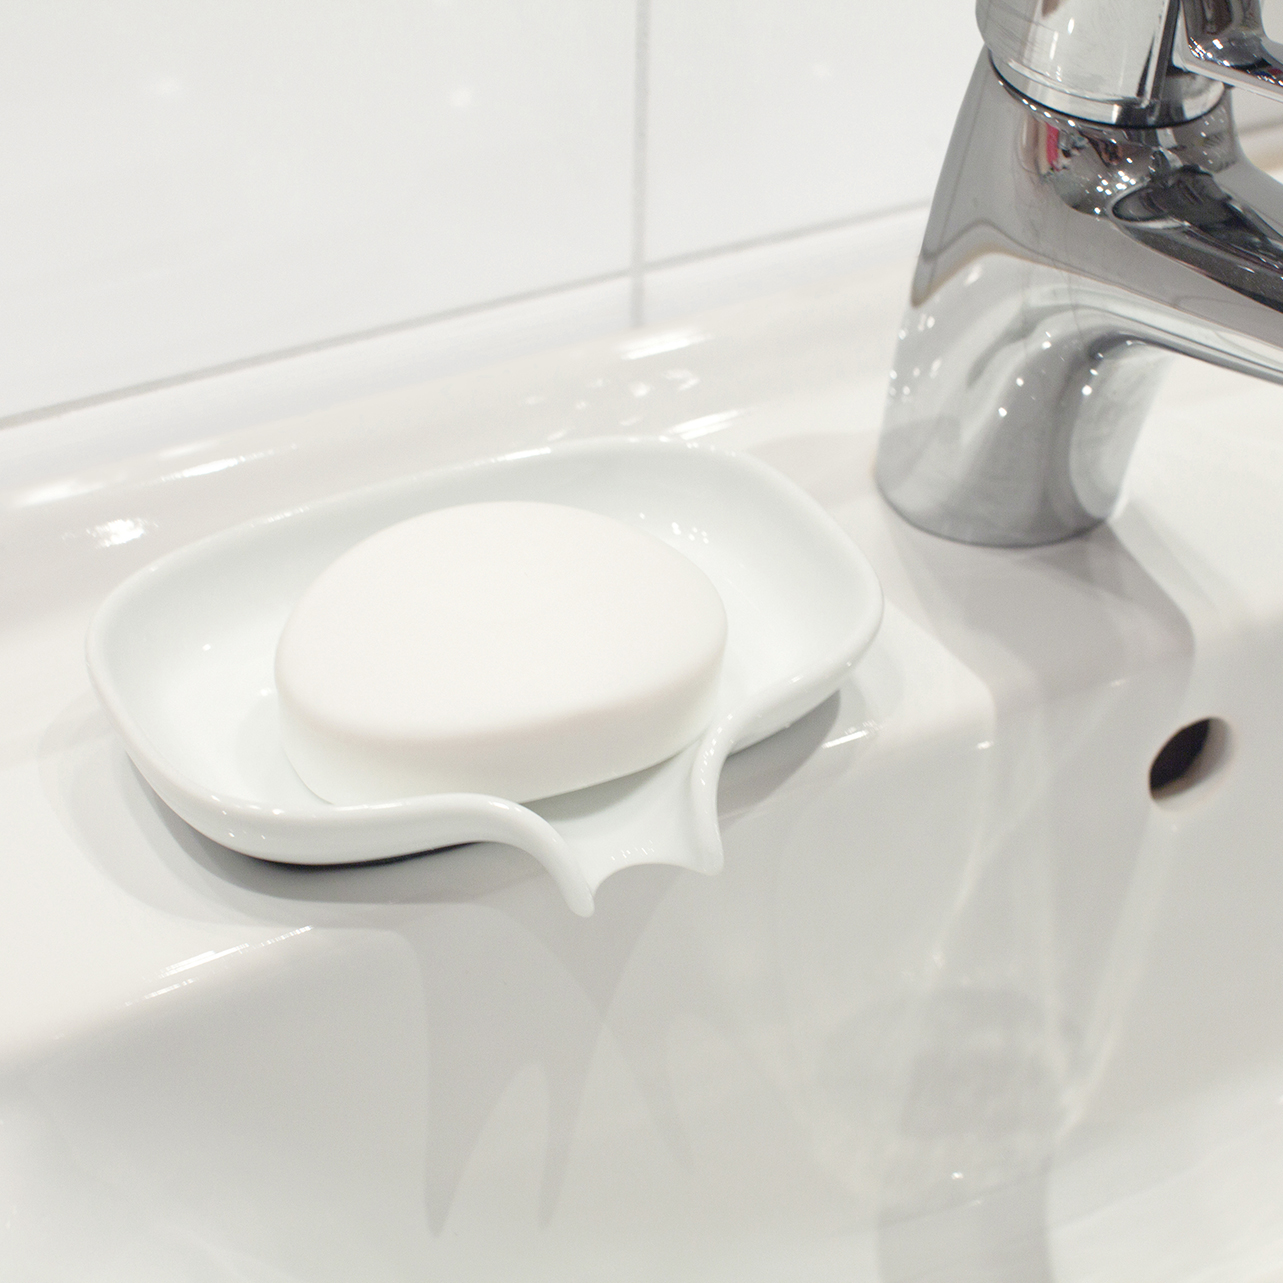 Soap dish with drainage spout silicone, white